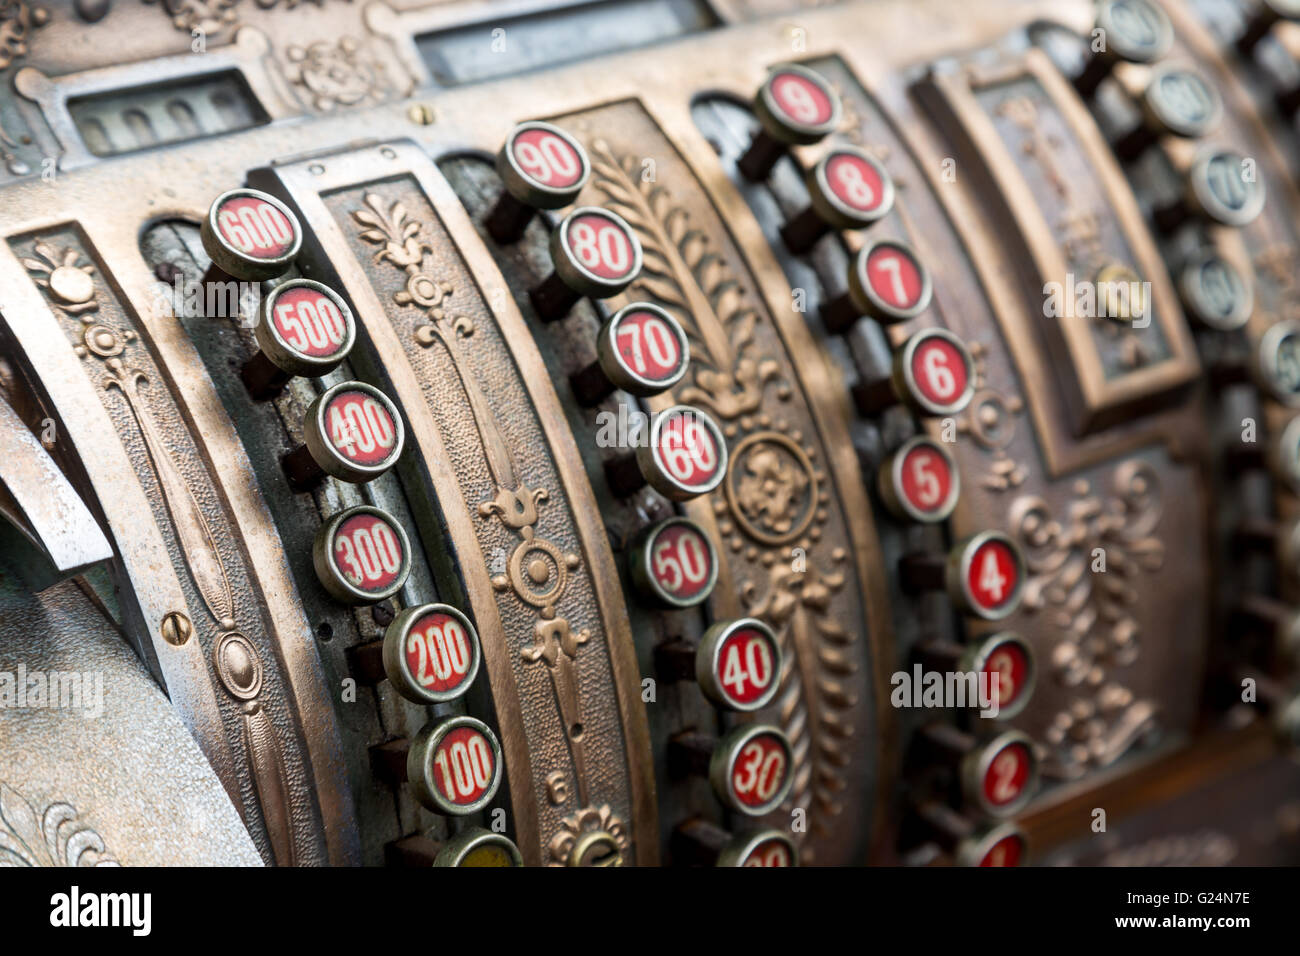 closeup vintage cash register with red round buttons for digits Stock Photo